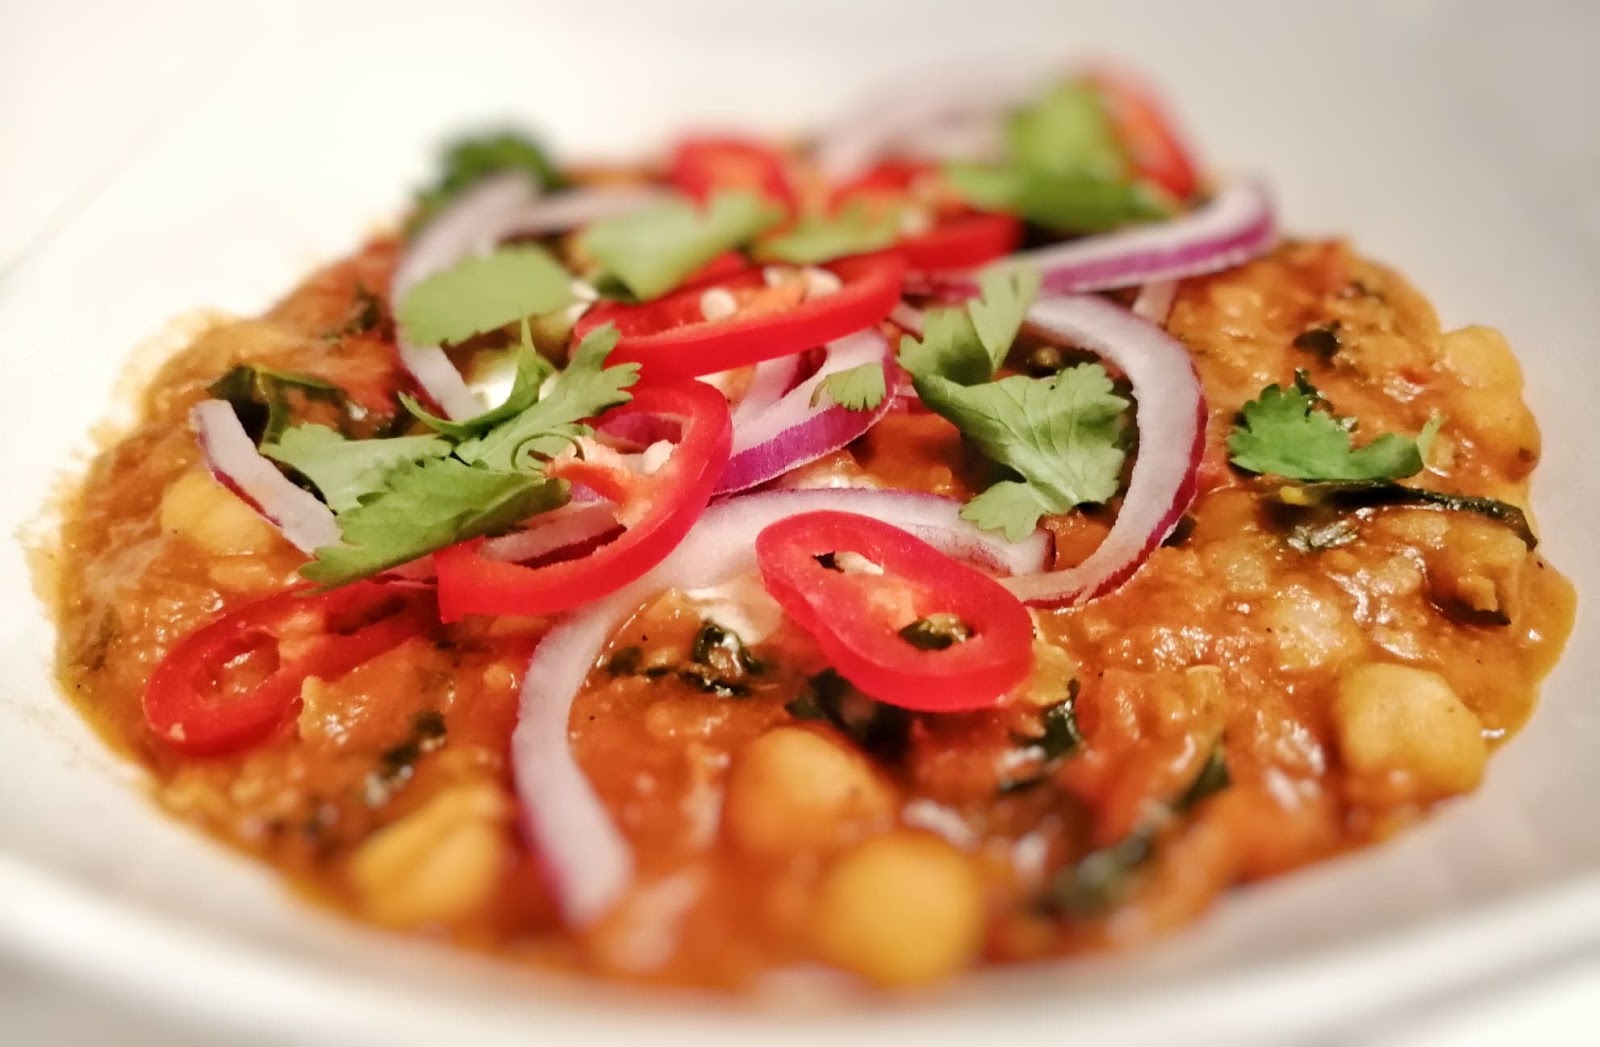 Featured image for Resident Recipe - Lentil, Chickpea and Kale Curry